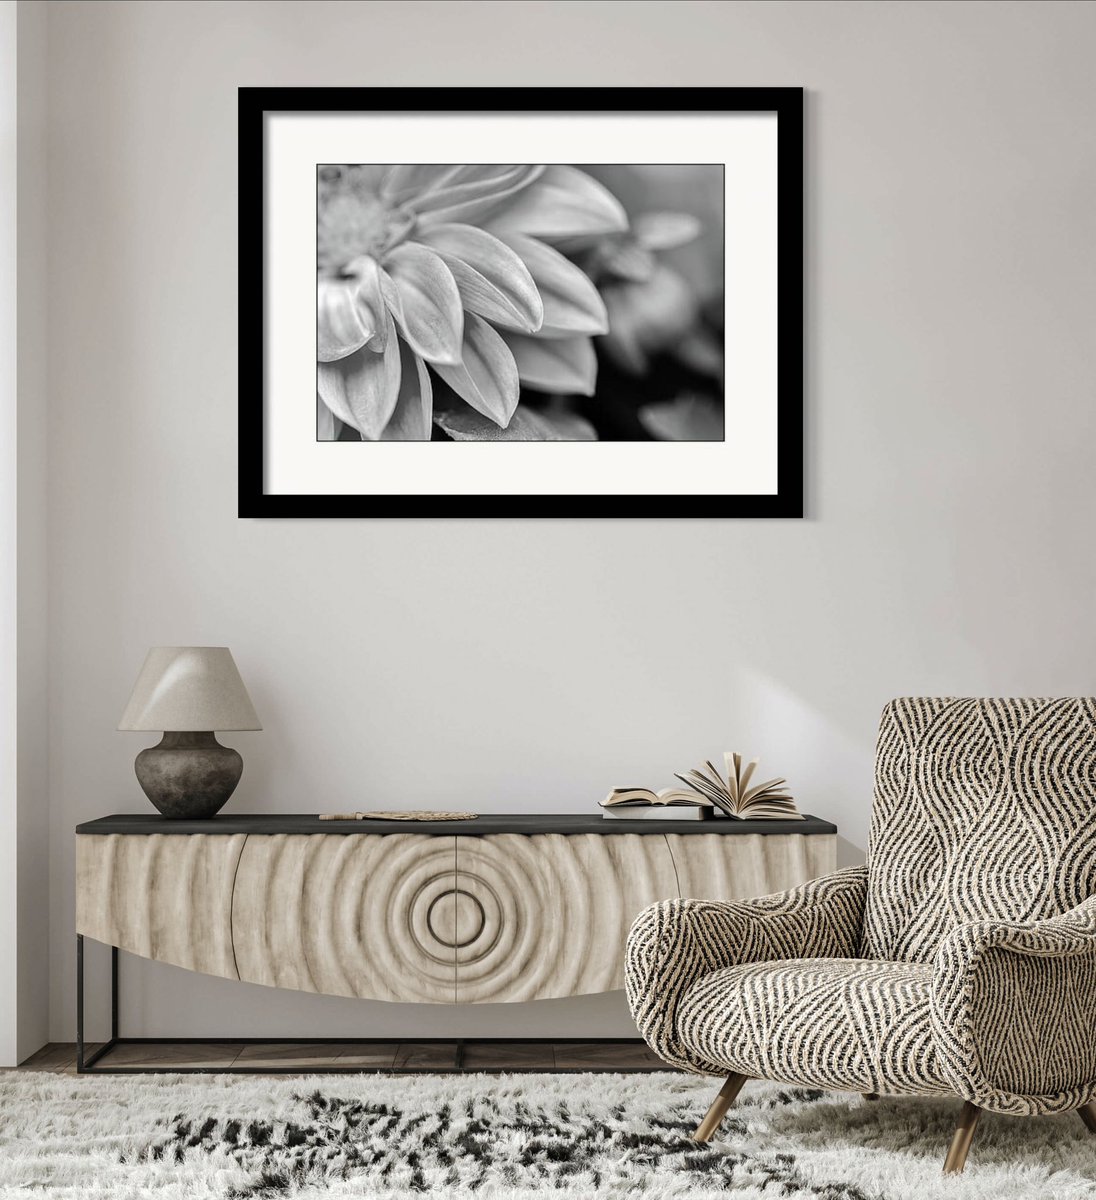 Black And White Petals 

#wallart and more HERE: 5-tanya-smith.pixels.com/featured/black…

#walldecor #wallartforsale #WallArtDecor #floral #blackandwhite #PhotographyIsArt #photography #buyintoart #FillThatEmptyWall #giftideas